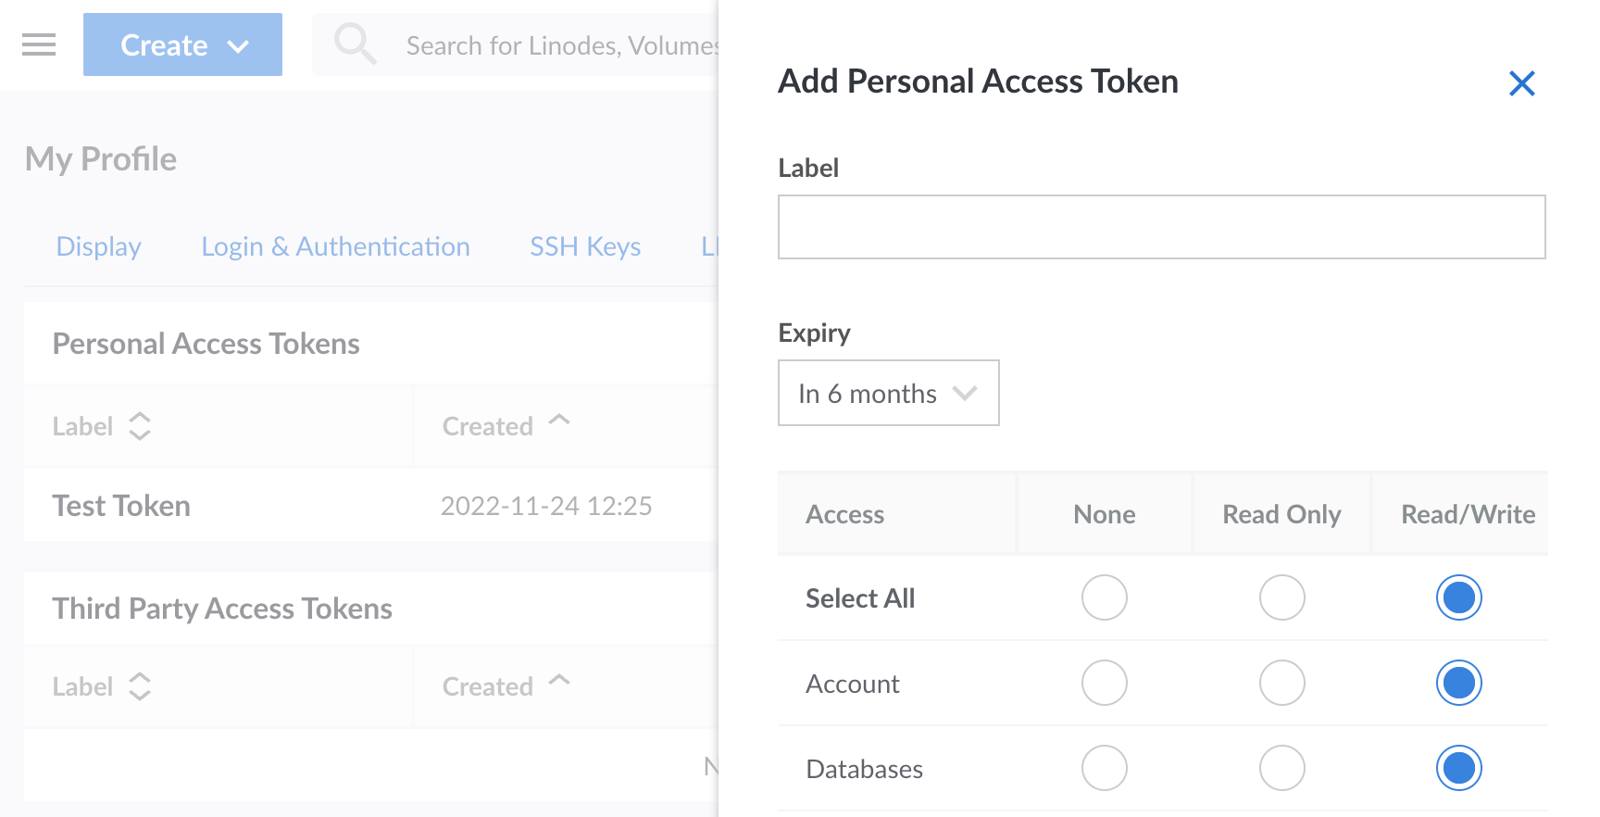 Screenshot of the Add Personal Access Token form